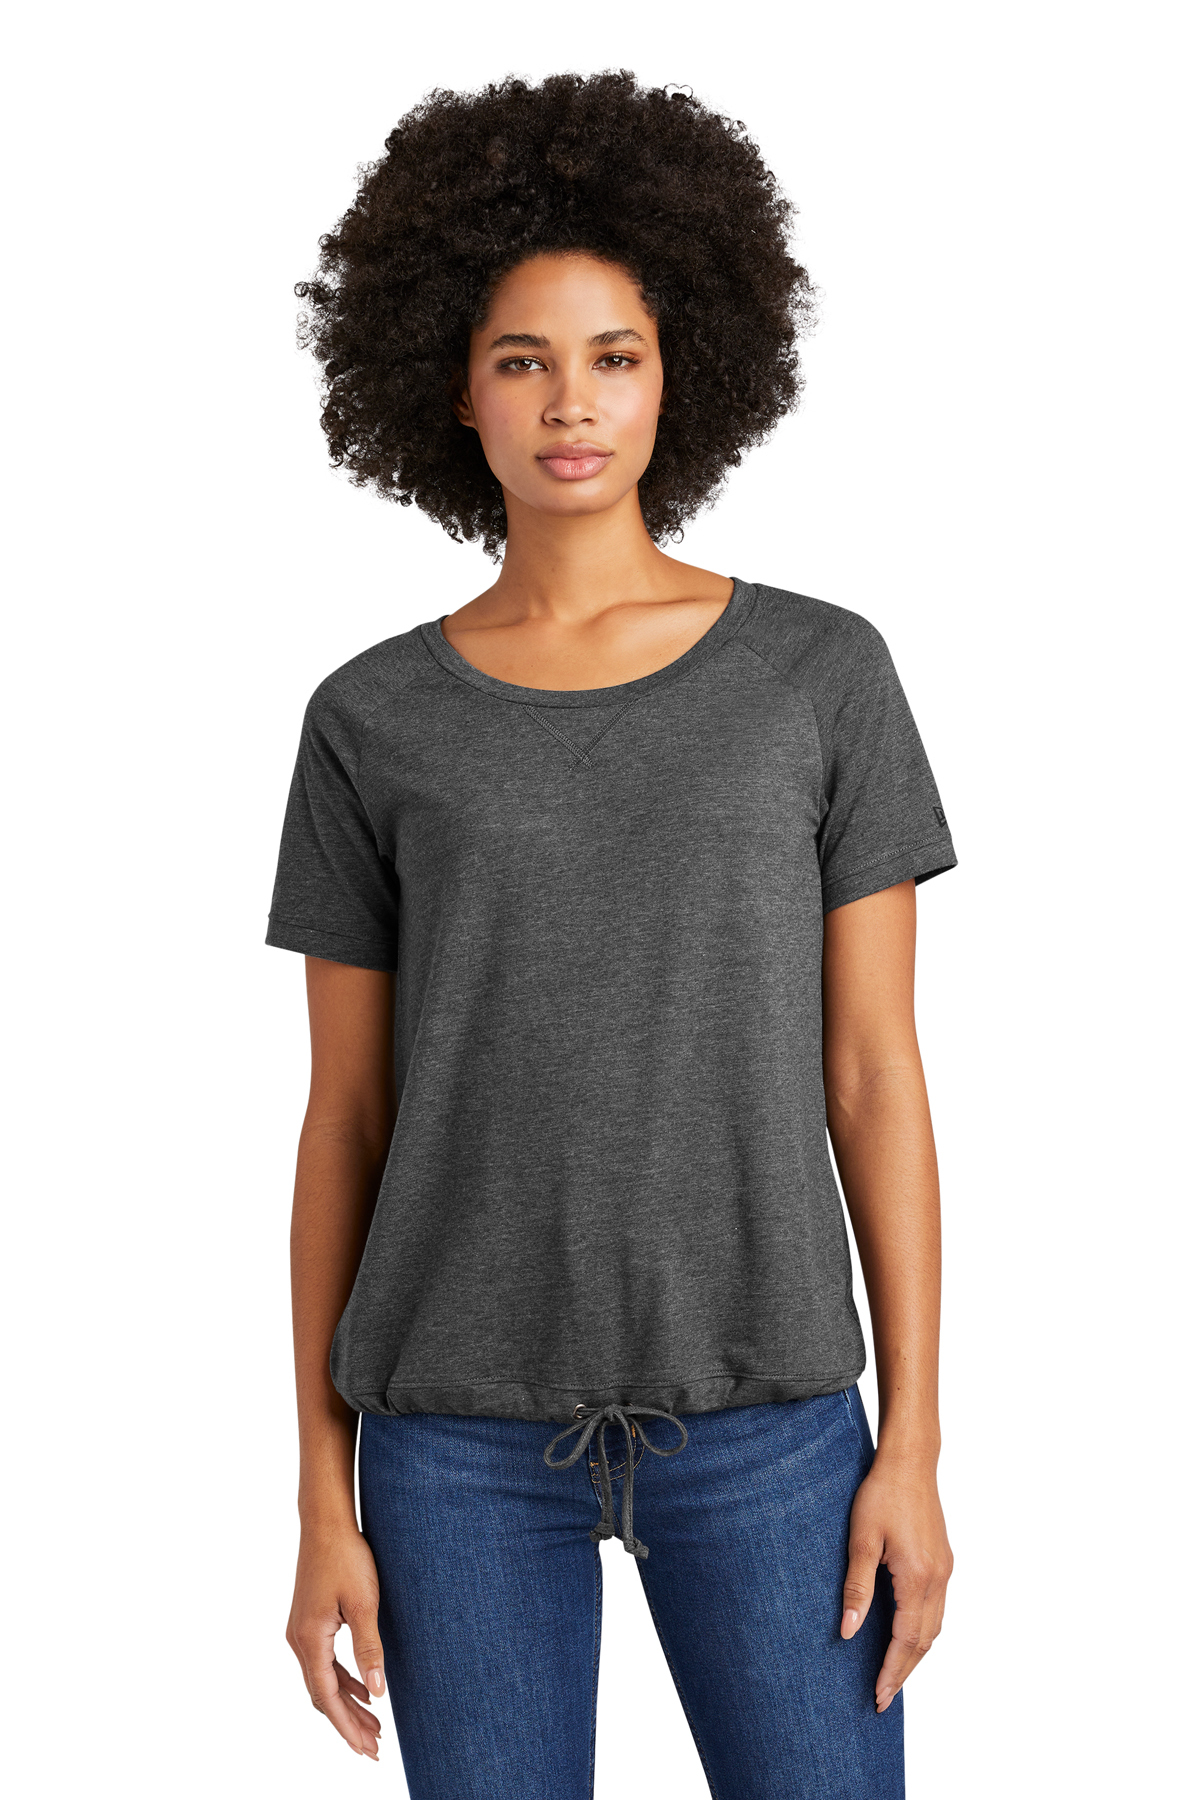 New Era Ladies Tri-Blend Performance Cinch Tee | Product | Company Casuals